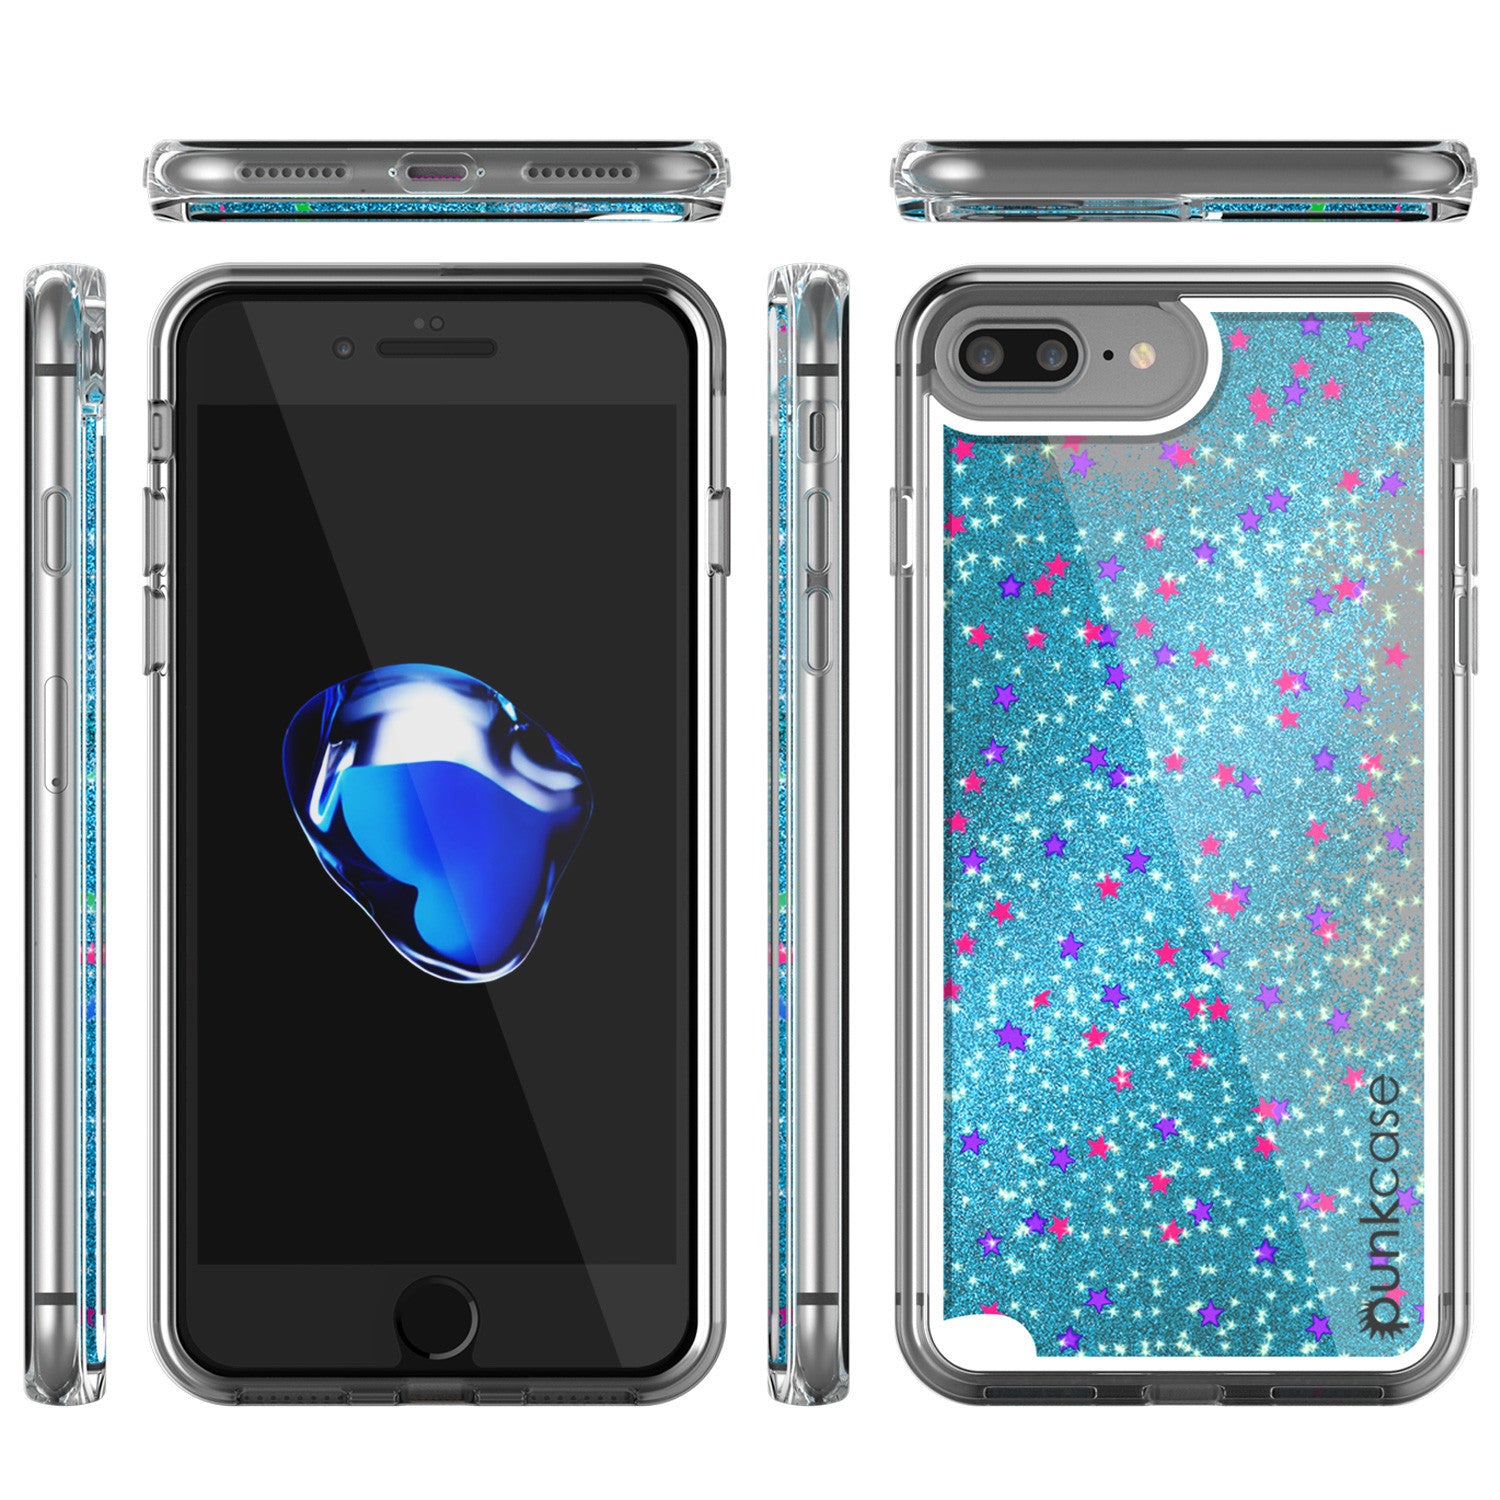 iPhone 7 Plus Case, PunkCase LIQUID Teal Series, Protective Dual Layer Floating Glitter Cover